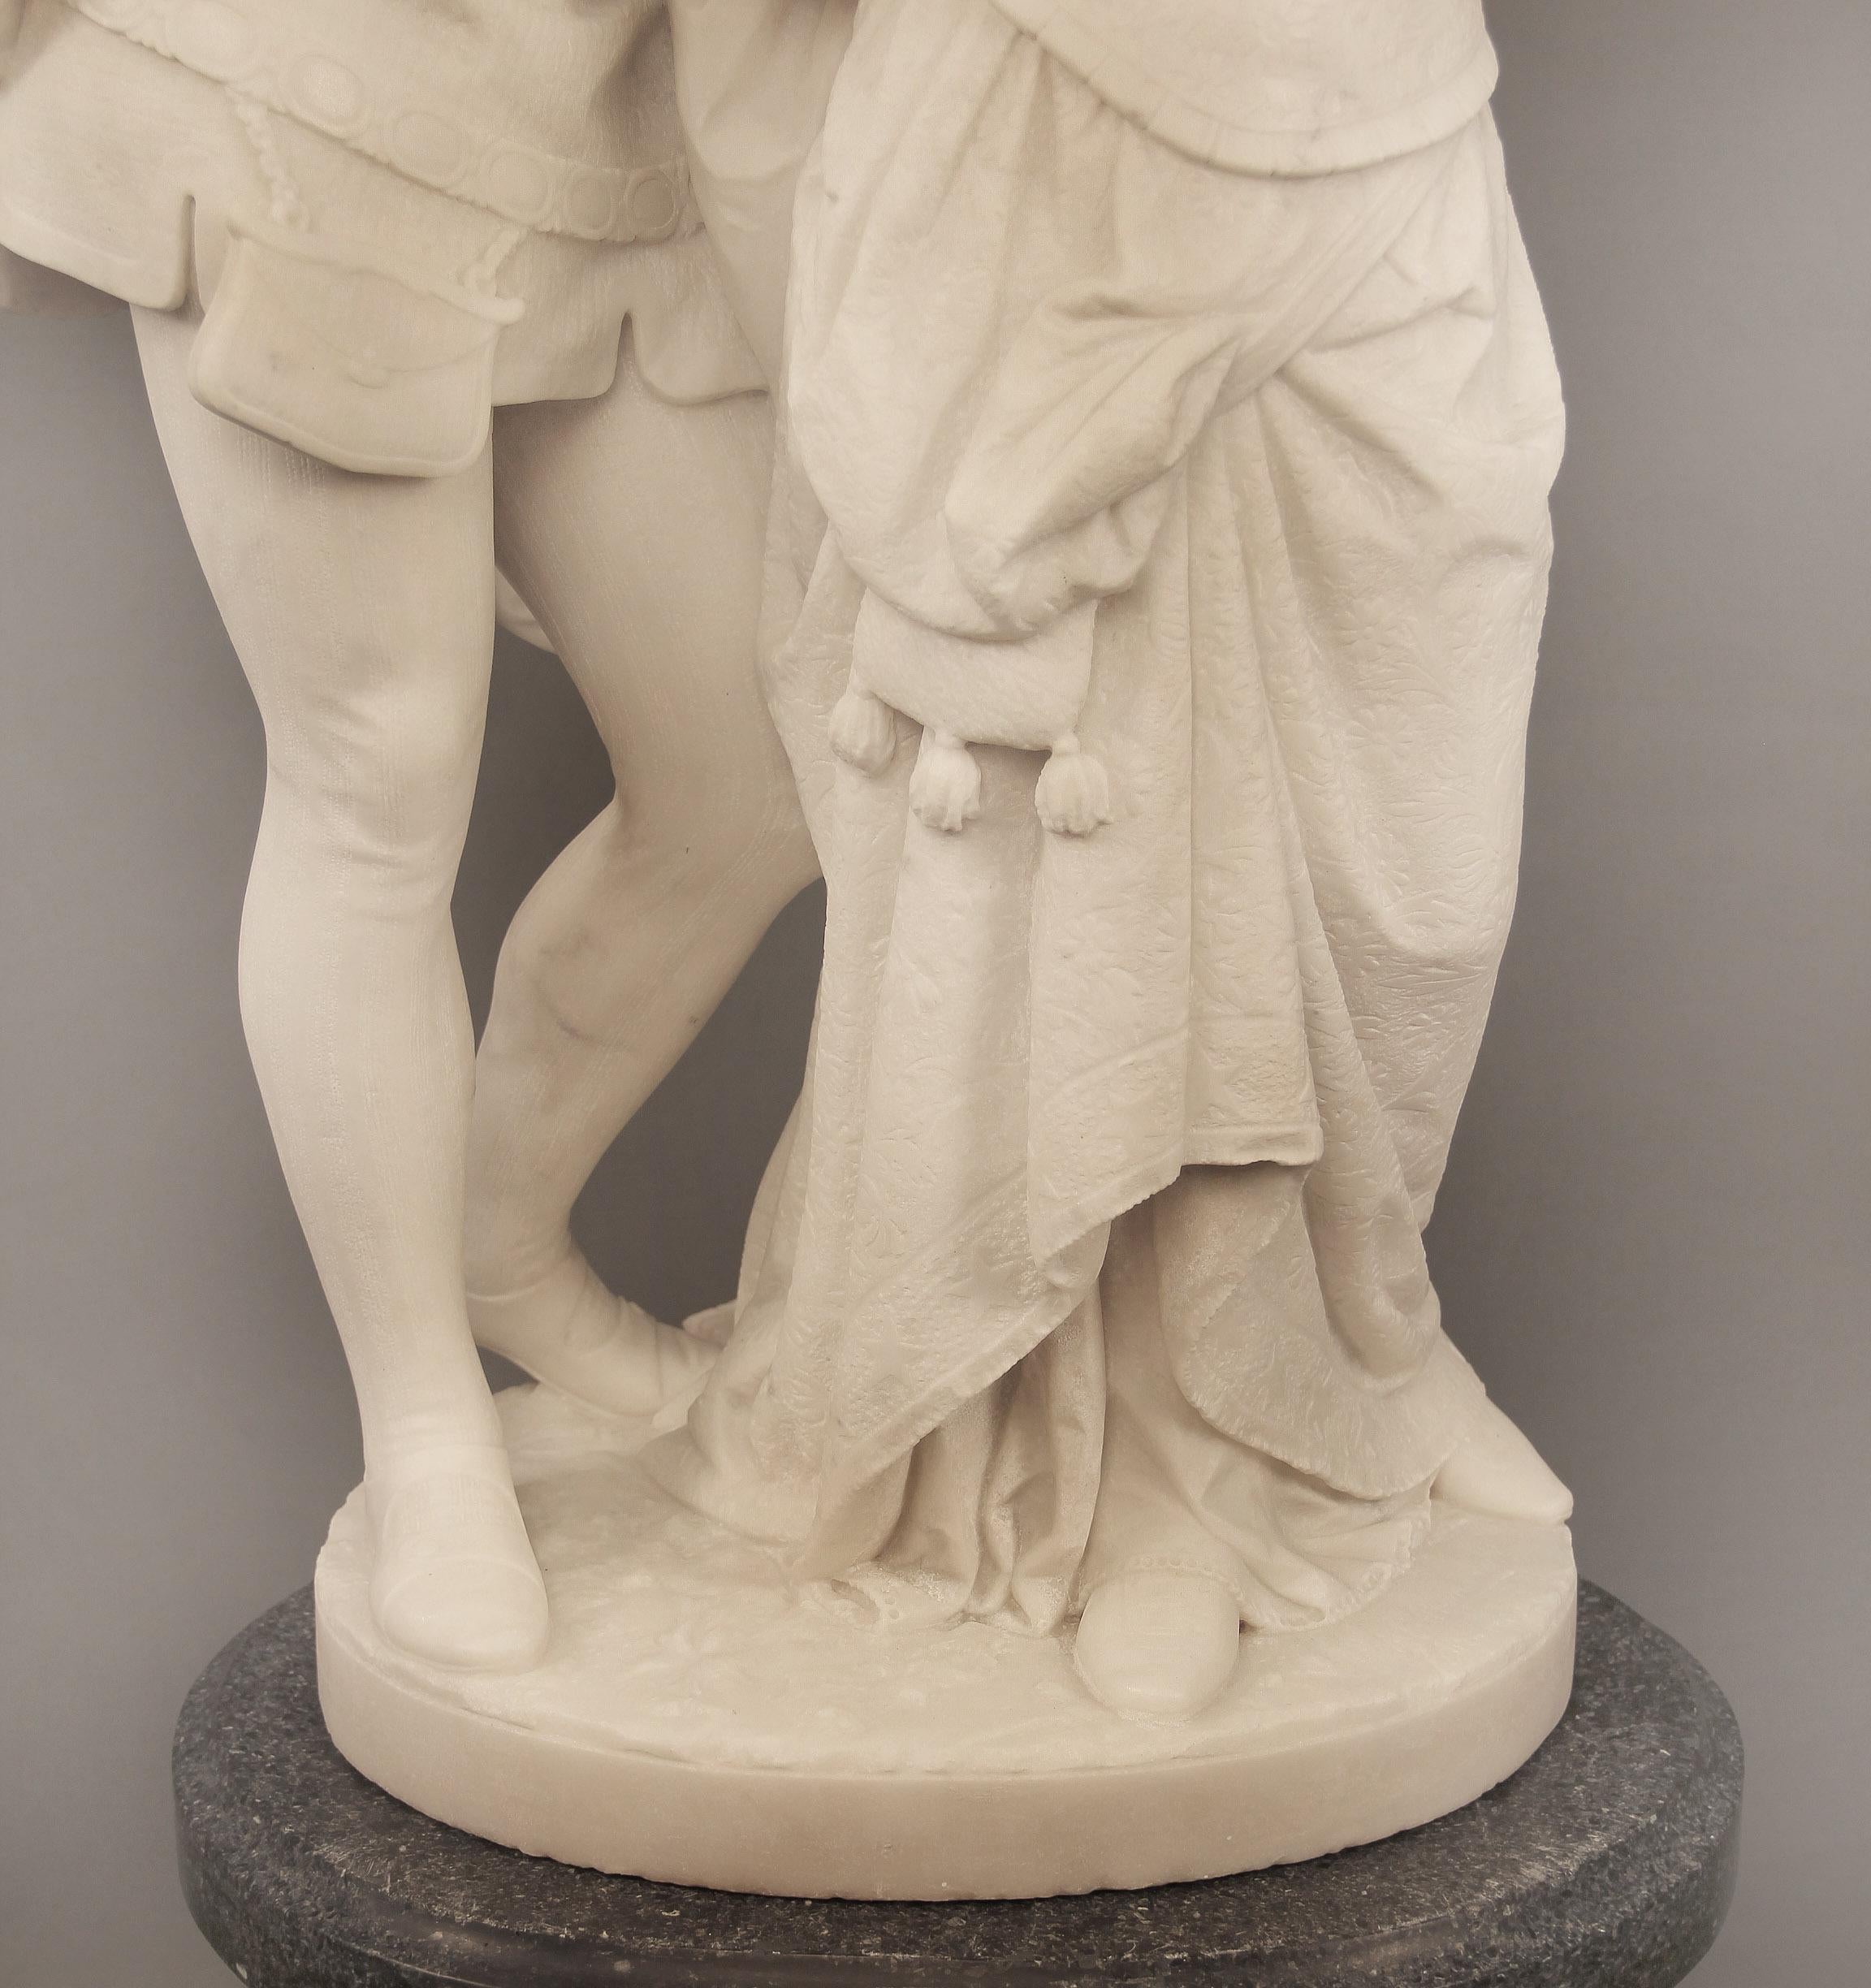 19th Century Italian White Carrara Marble, “Paolo and Francesca” by Romanelli For Sale 1